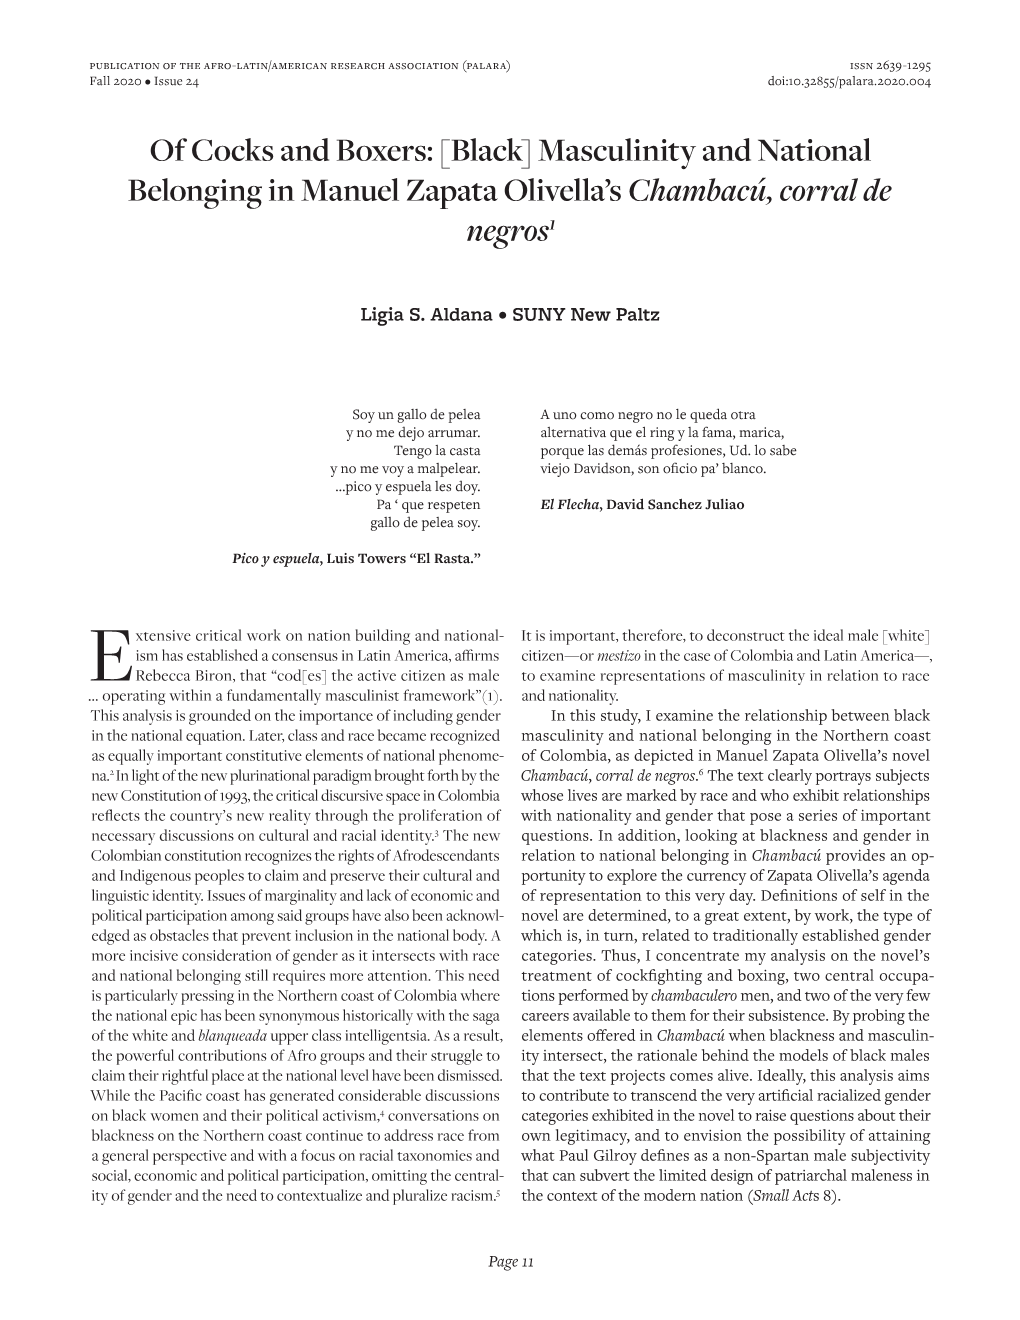 Masculinity and National Belonging in Manuel Zapata Olivella's